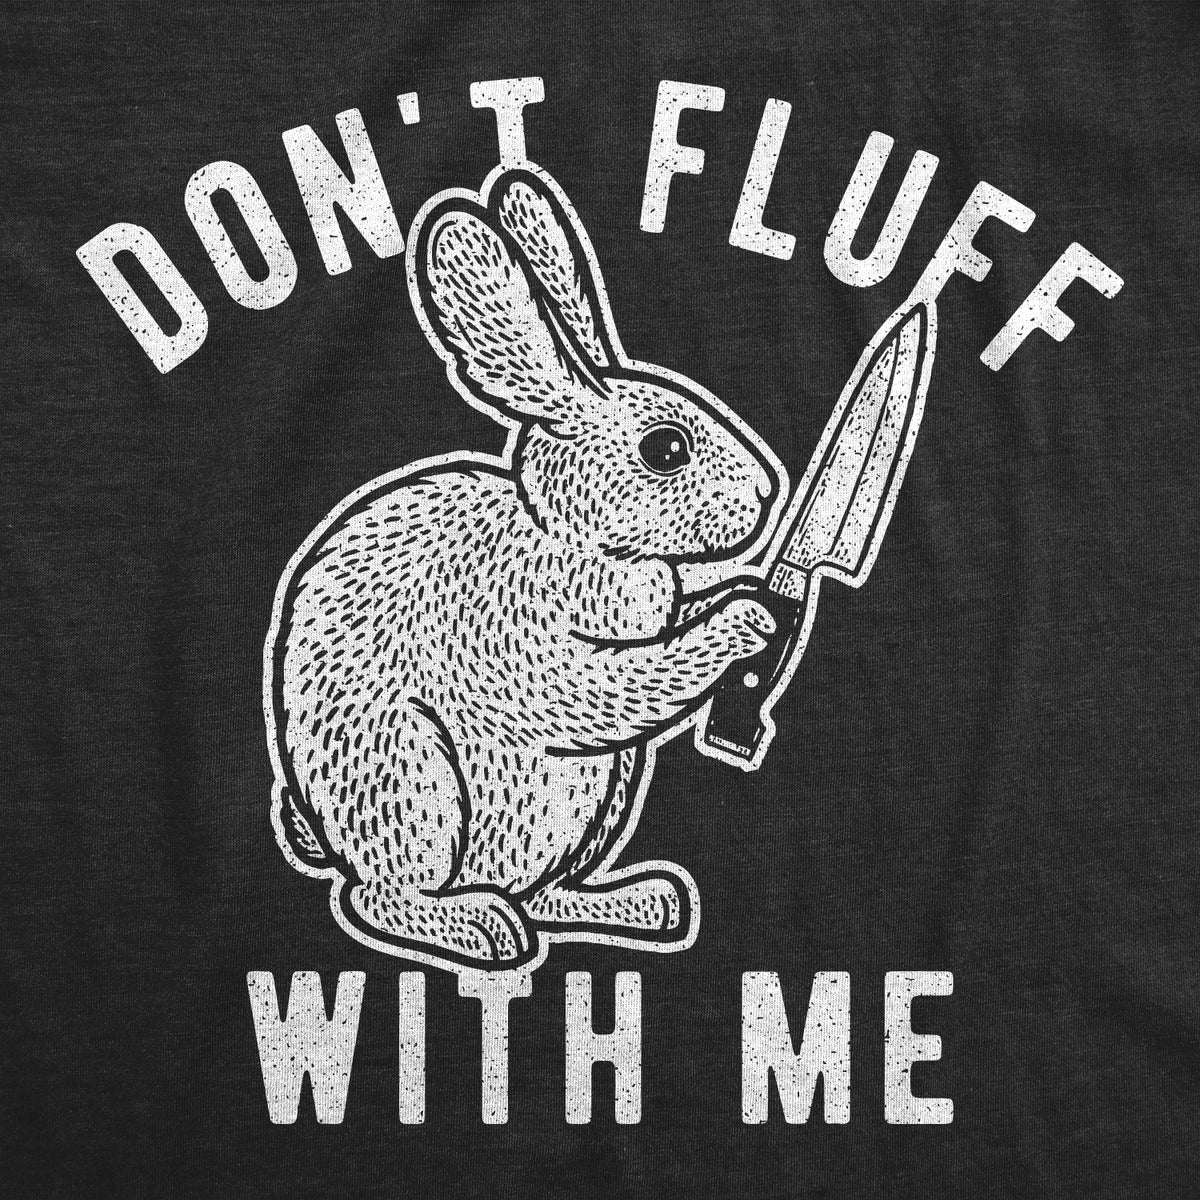 Don&#39;t Fluff With Me Bunny Men&#39;s T Shirt